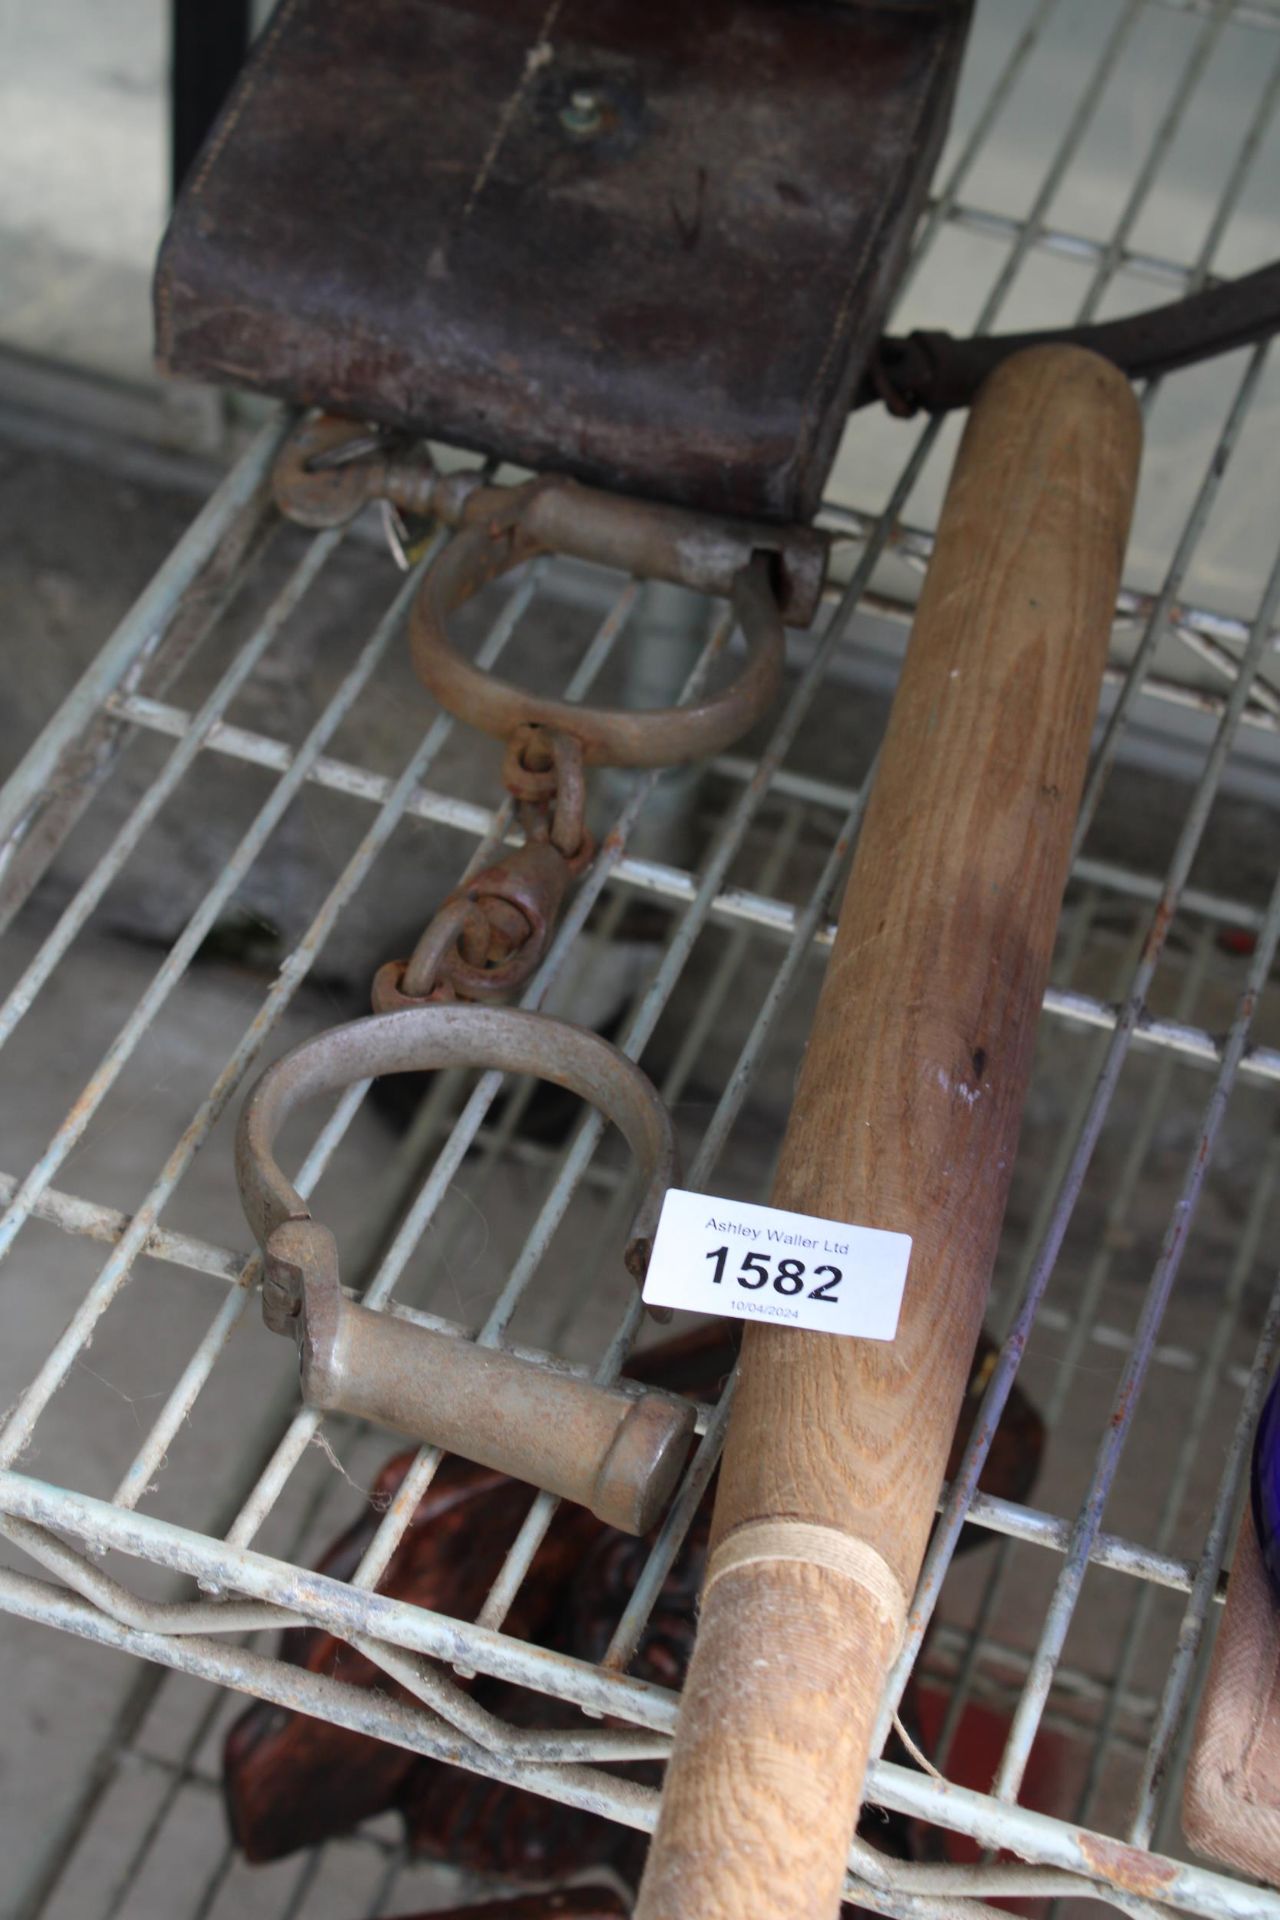 A PAIR OF VINTAGE HANDCUFFS WITH KEY AND A ROUNDERS BAT - Image 2 of 2